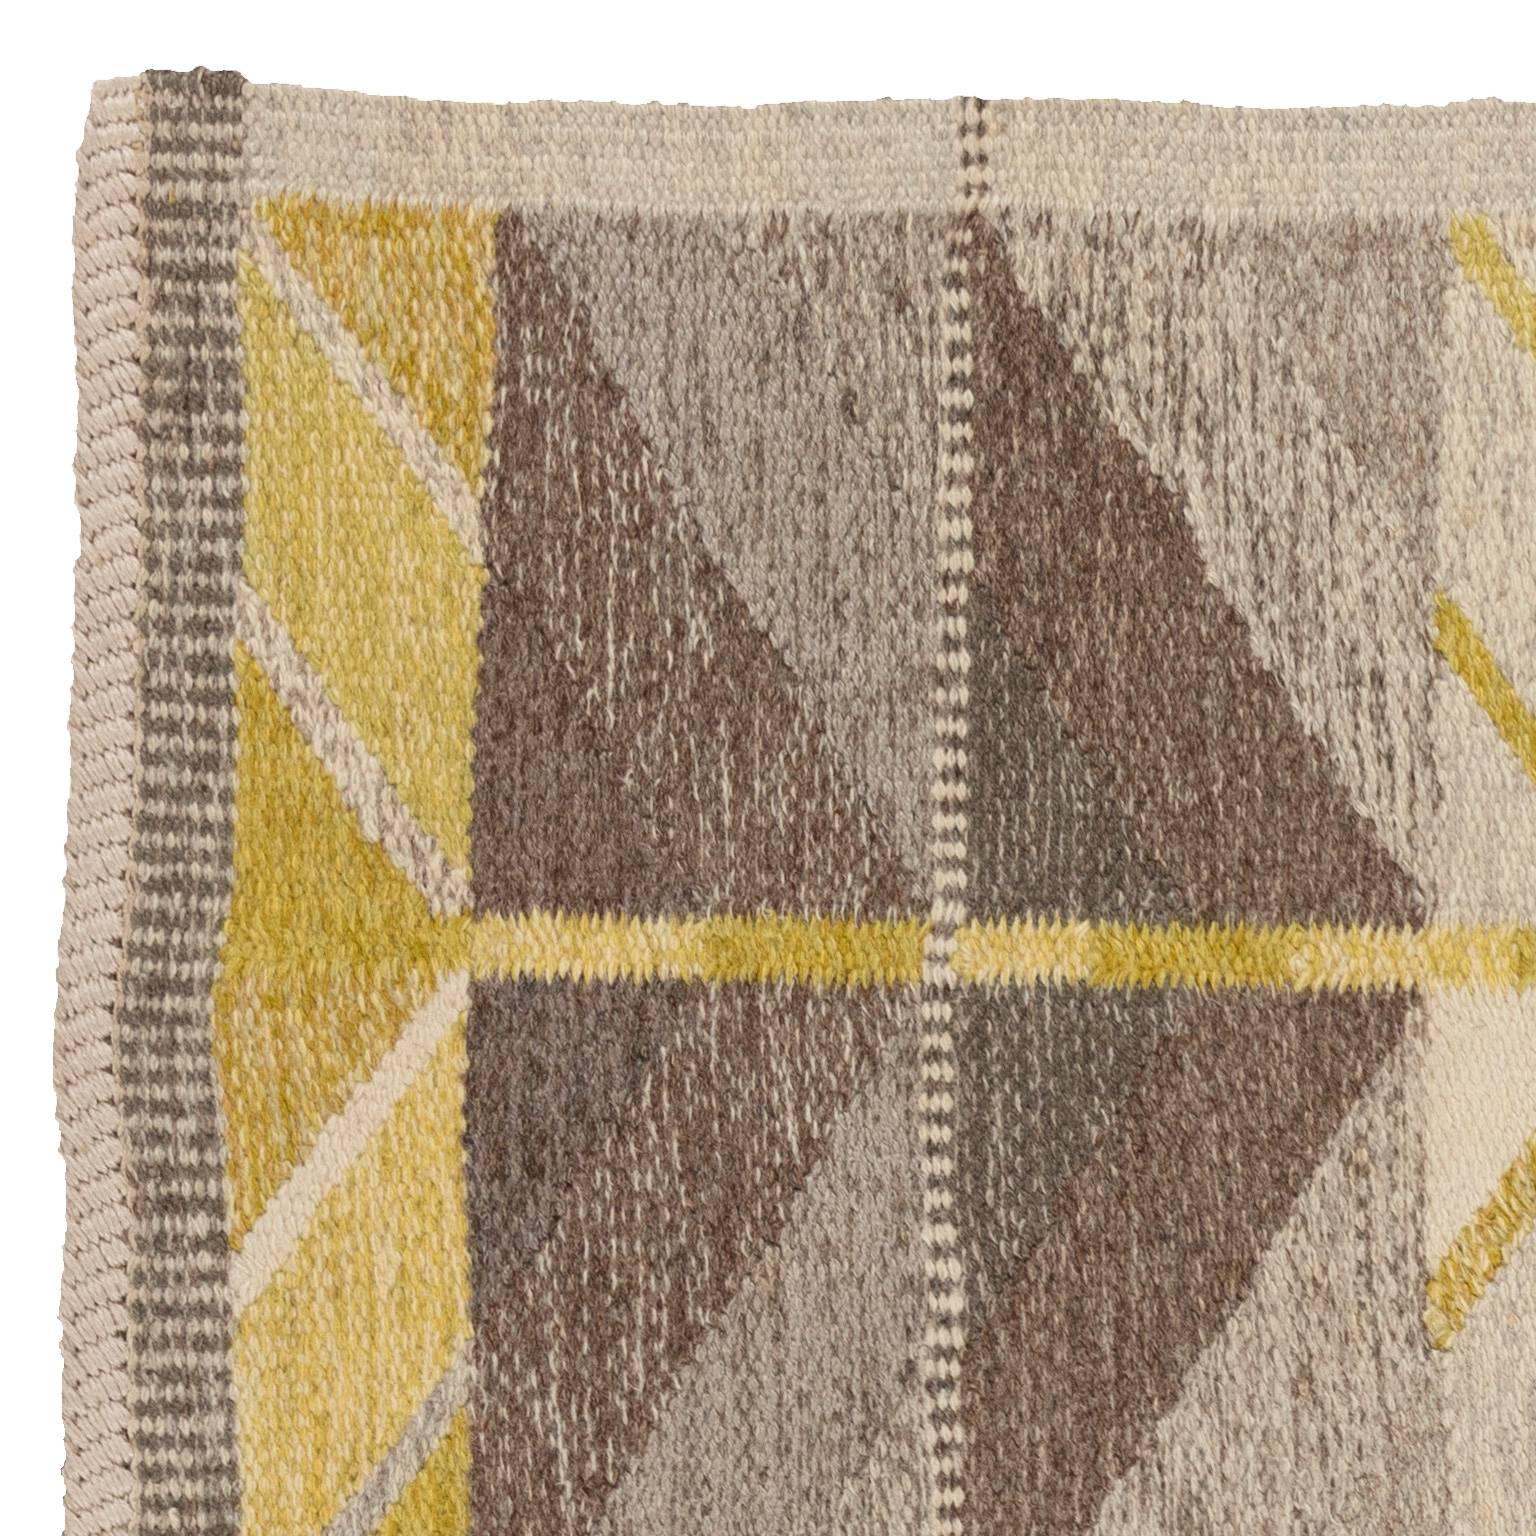 This iconic vintage Swedish flat-weave rug designed by Ingrid Dessau (1923-2000) features an all-over design of geometric shapes and lines in varying shades of grey, with yellow accents. The rug is a handwoven art-piece and always modern. Excellent